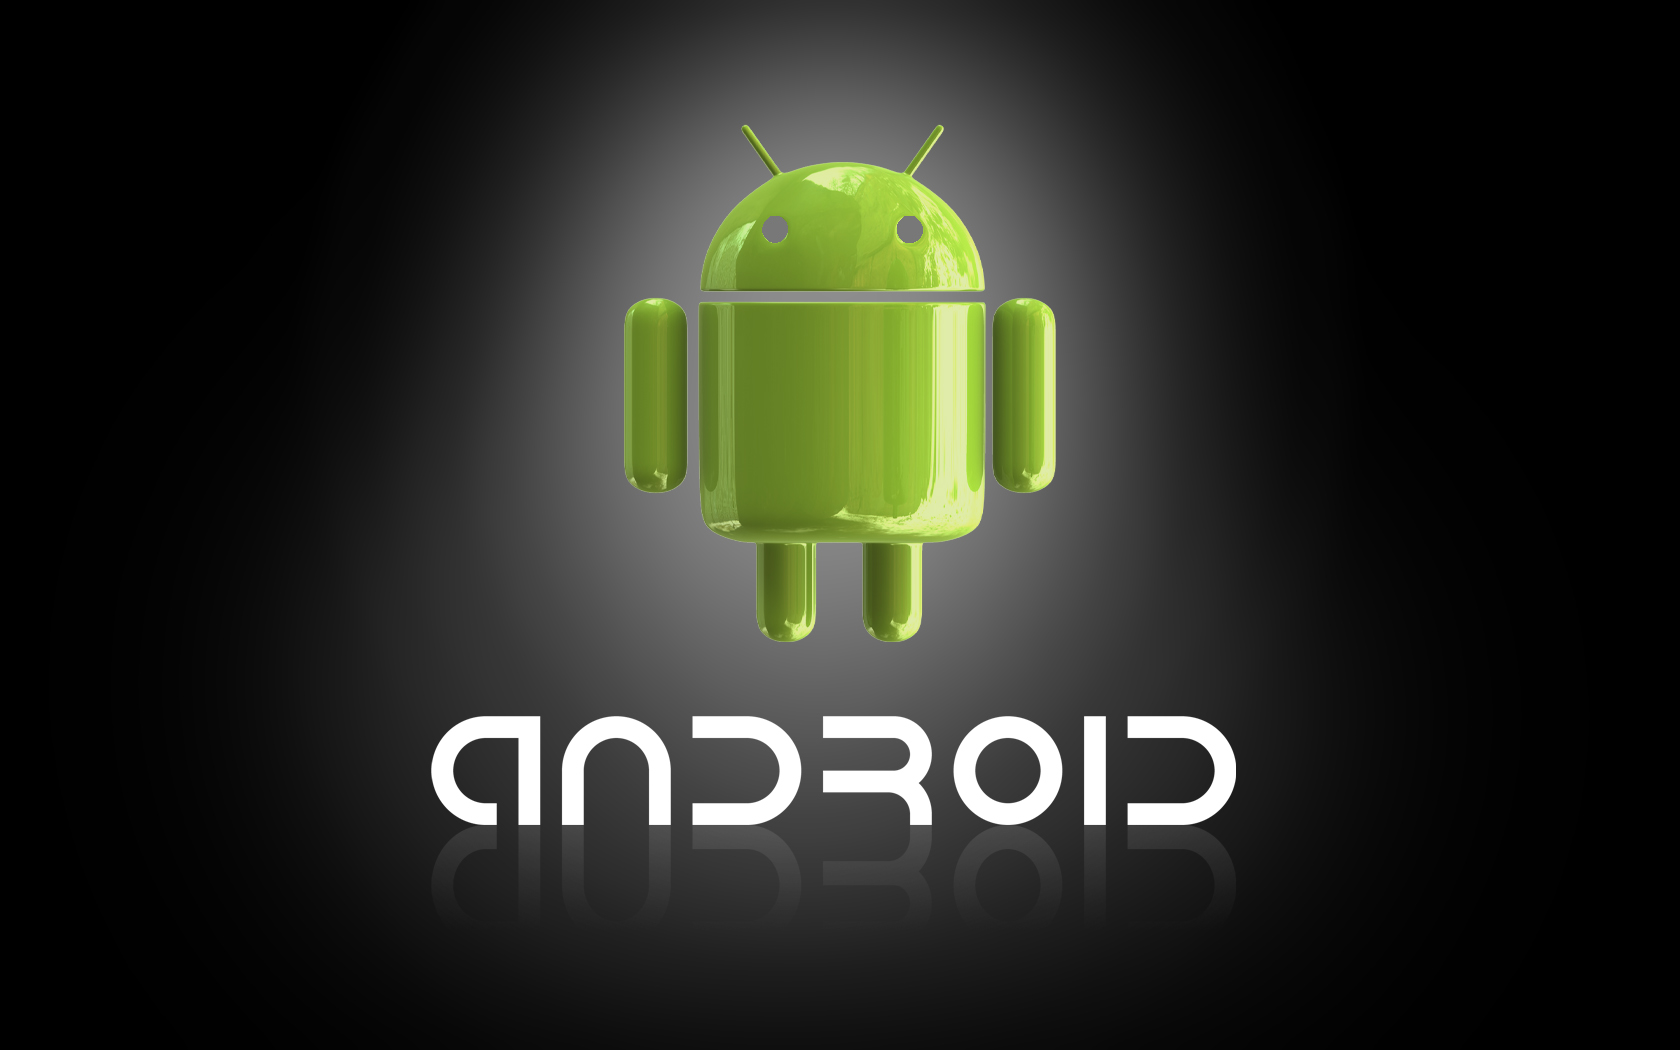 download the last version for android Pichon 10.0.1